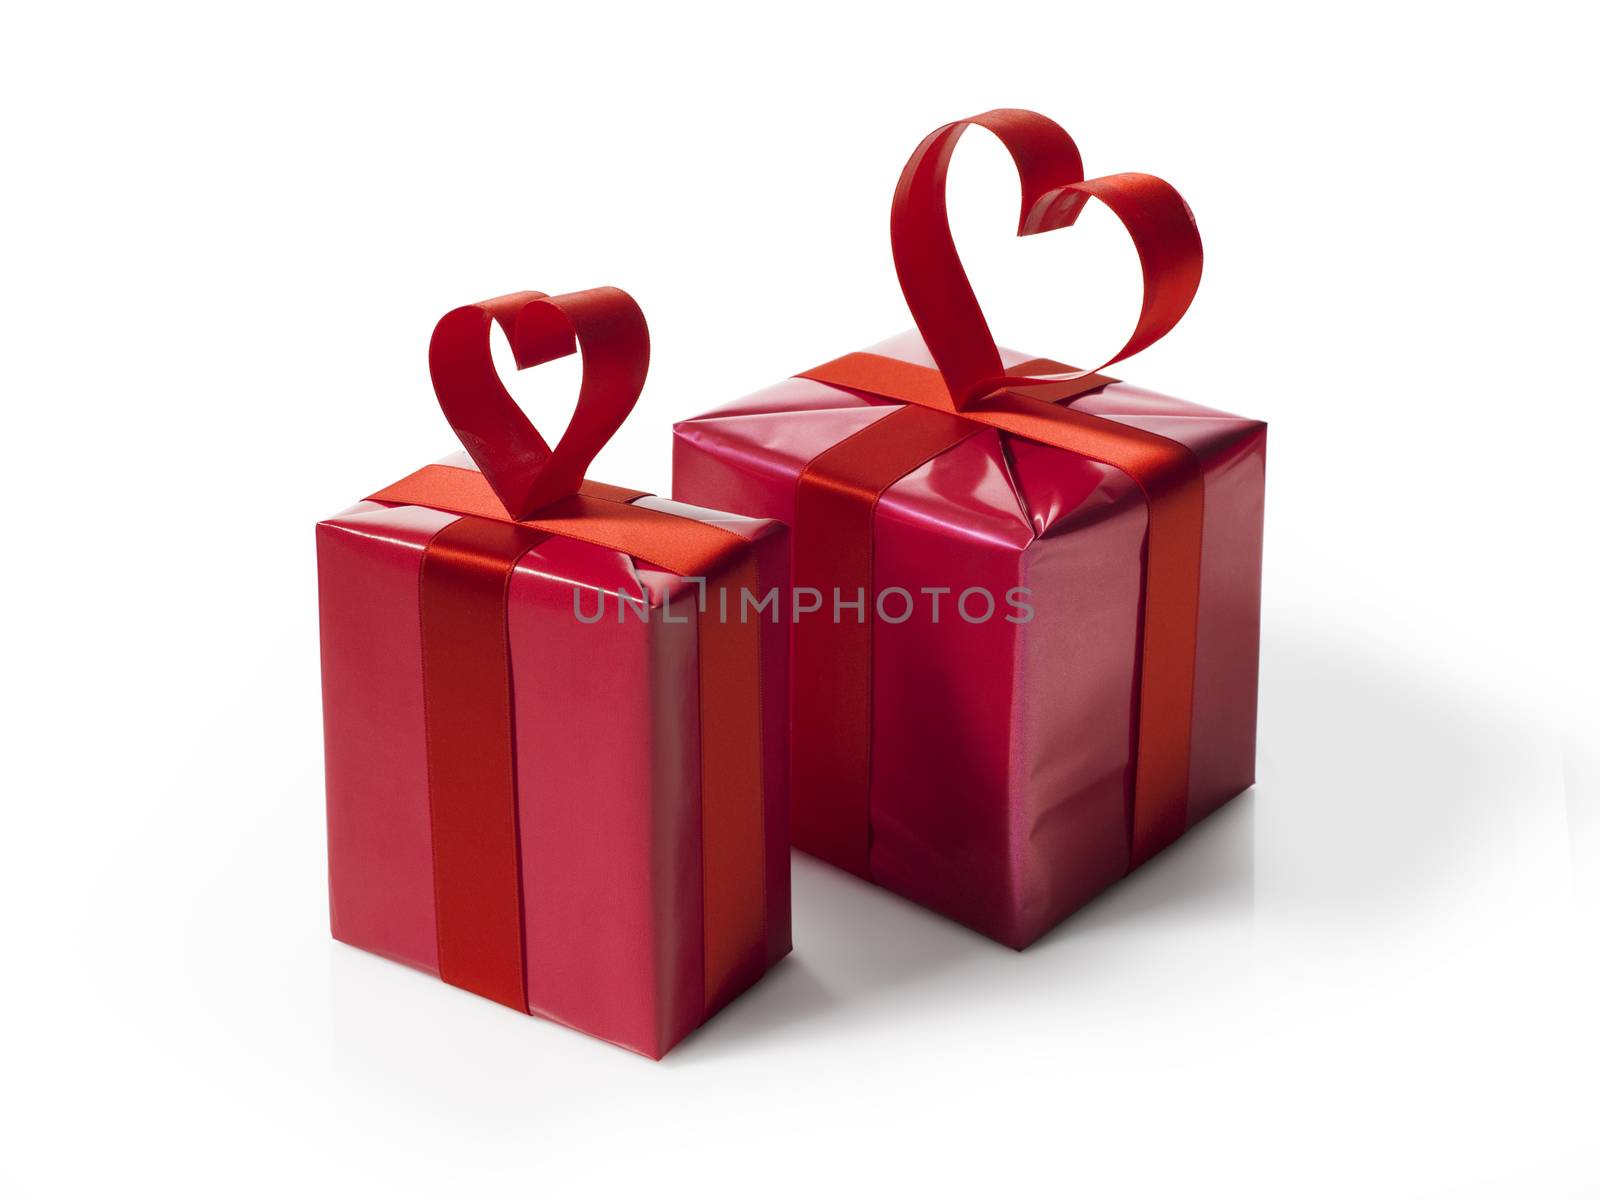 Red gift box with red hart shaped ribbon bow by janssenkruseproductions